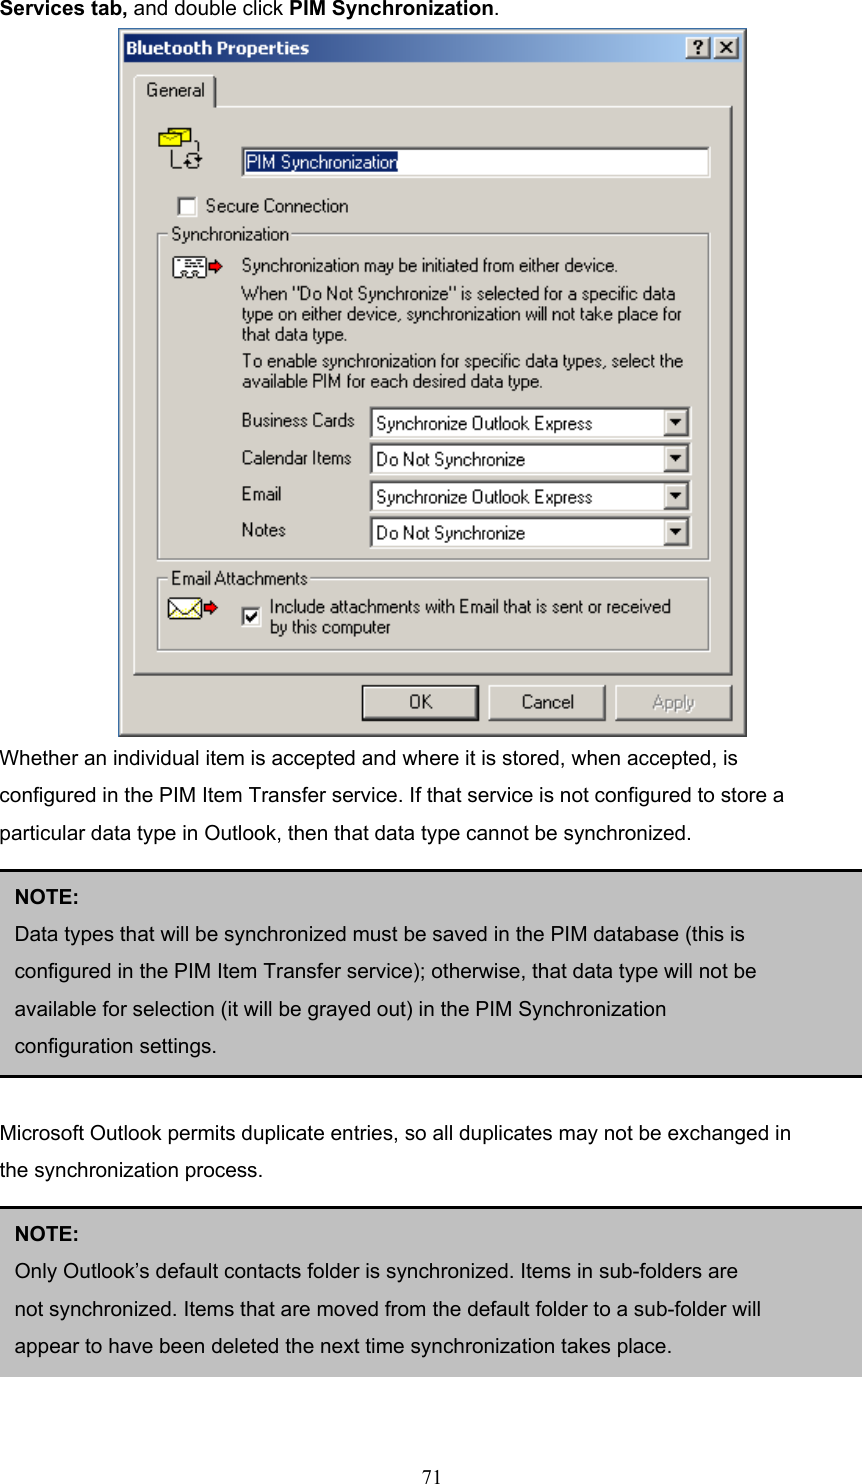  71 Services tab, and double click PIM Synchronization.  Whether an individual item is accepted and where it is stored, when accepted, is configured in the PIM Item Transfer service. If that service is not configured to store a particular data type in Outlook, then that data type cannot be synchronized.        Microsoft Outlook permits duplicate entries, so all duplicates may not be exchanged in the synchronization process.       NOTE:  Data types that will be synchronized must be saved in the PIM database (this is configured in the PIM Item Transfer service); otherwise, that data type will not be available for selection (it will be grayed out) in the PIM Synchronization configuration settings. NOTE:  Only Outlook’s default contacts folder is synchronized. Items in sub-folders are not synchronized. Items that are moved from the default folder to a sub-folder will appear to have been deleted the next time synchronization takes place. 